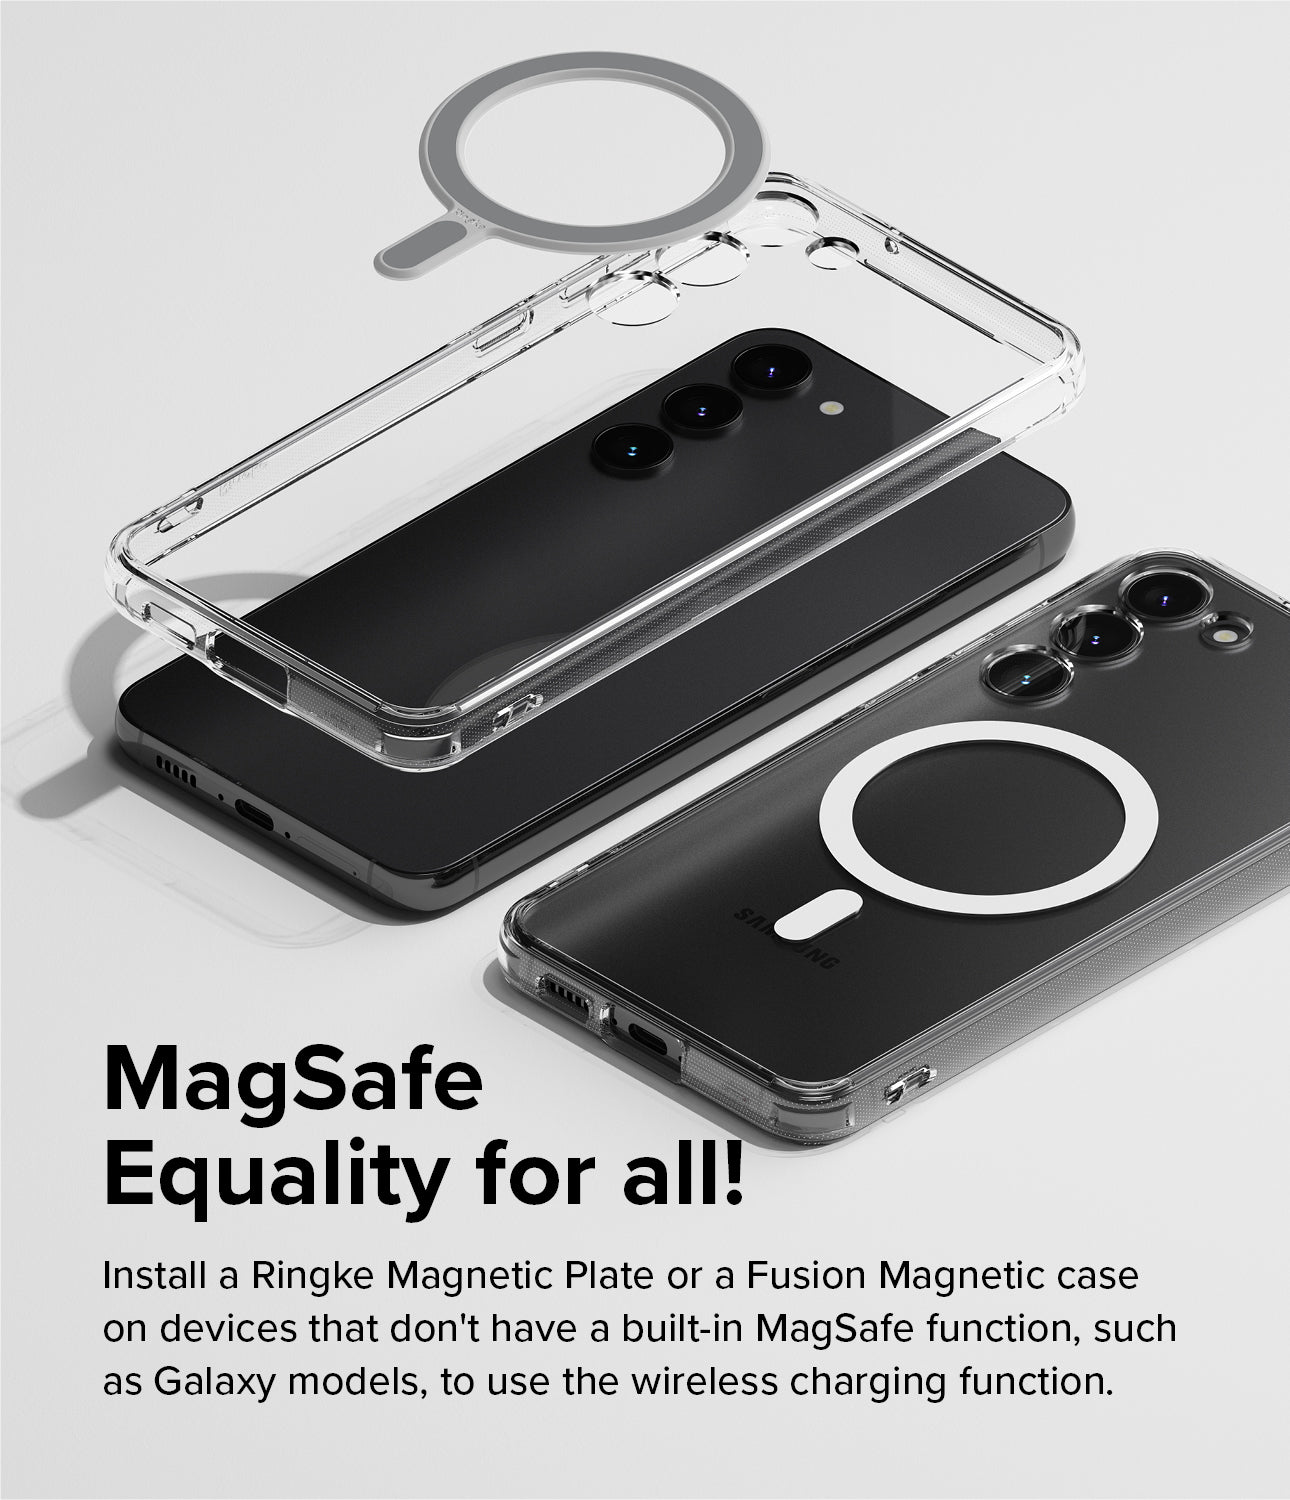 Ringke 3-in-1 Wireless Charger Stand - MagSafe equality for all! Install a Ringke Magnetic Plate or a Fusion Magnetic case on devices that don't have a built-in MagSafe function, such as Galaxy models, to use the wireless charging function.